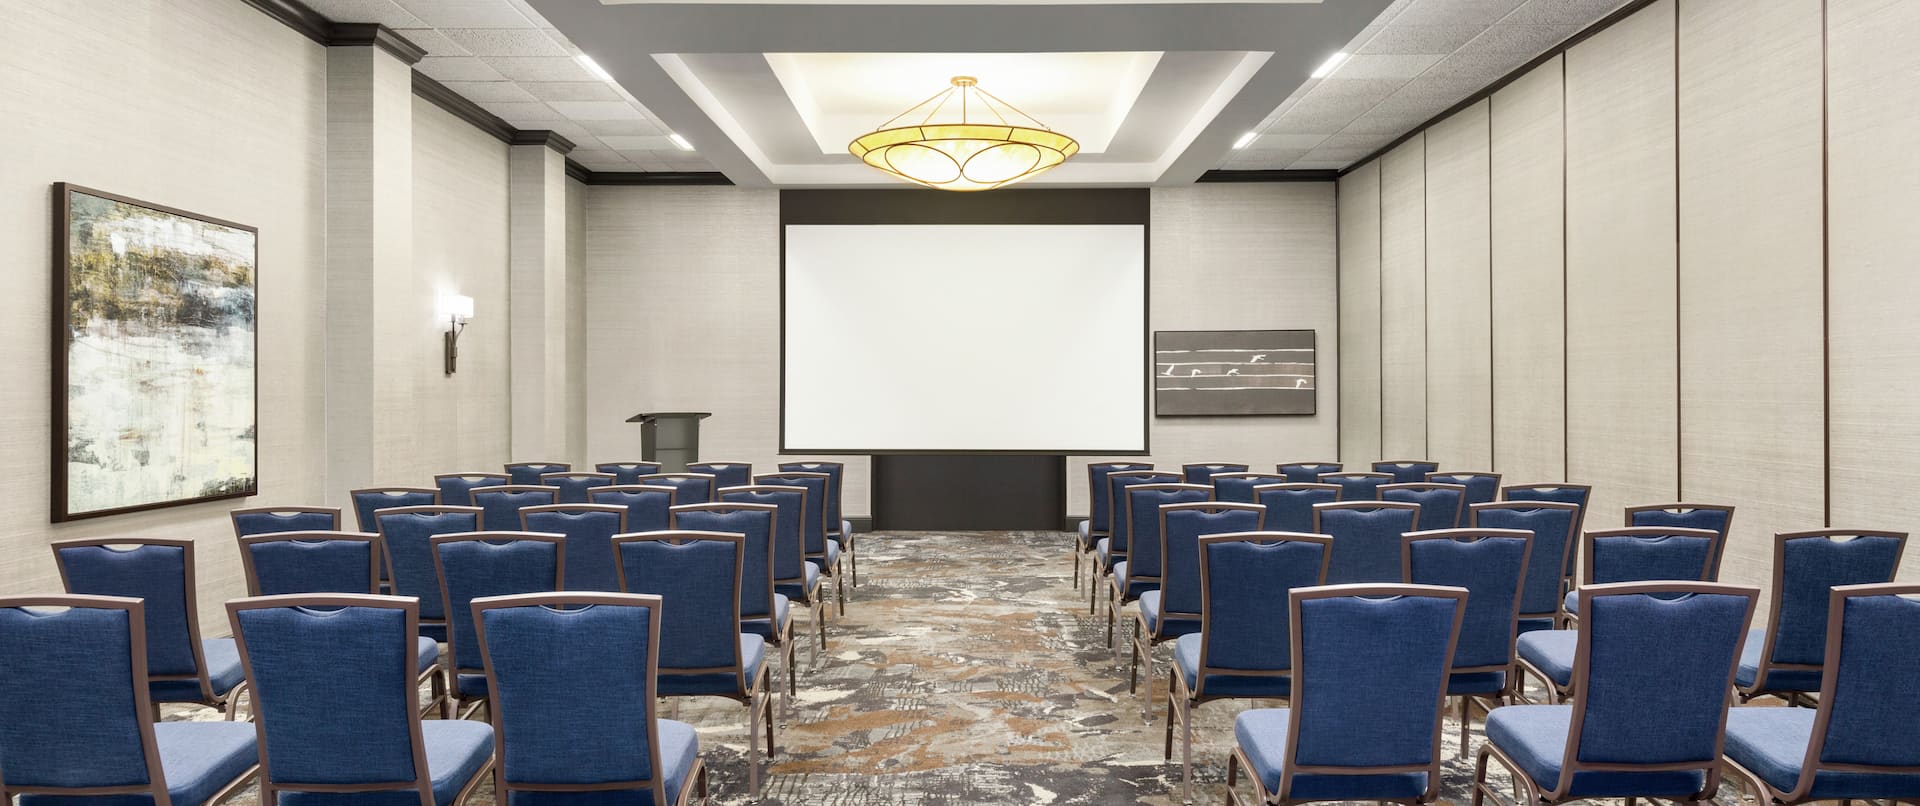 Spacious on-site meeting room featuring theater style setup and projector screen at front of room.